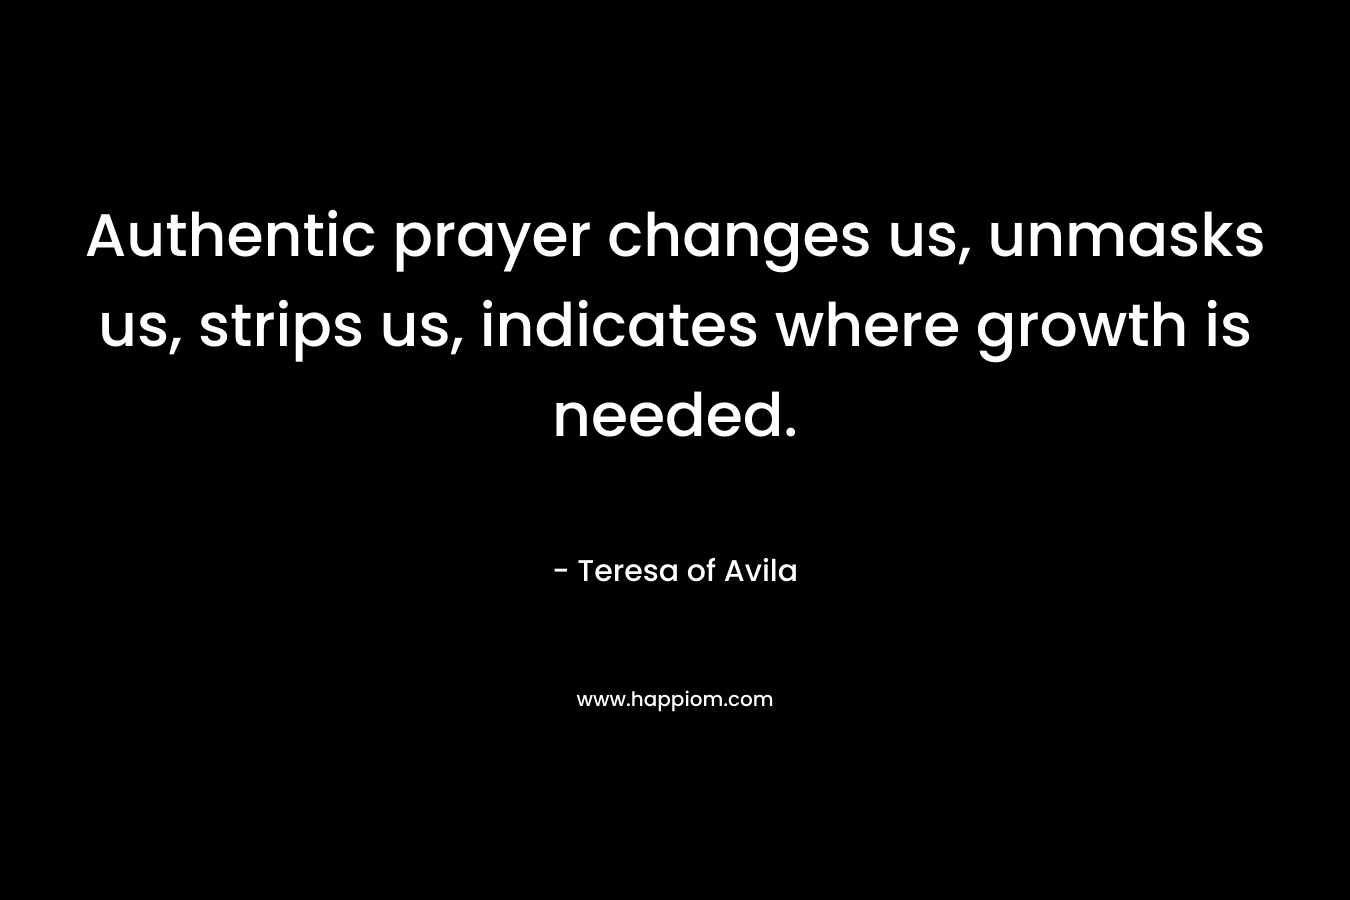 Authentic prayer changes us, unmasks us, strips us, indicates where growth is needed. – Teresa of Avila